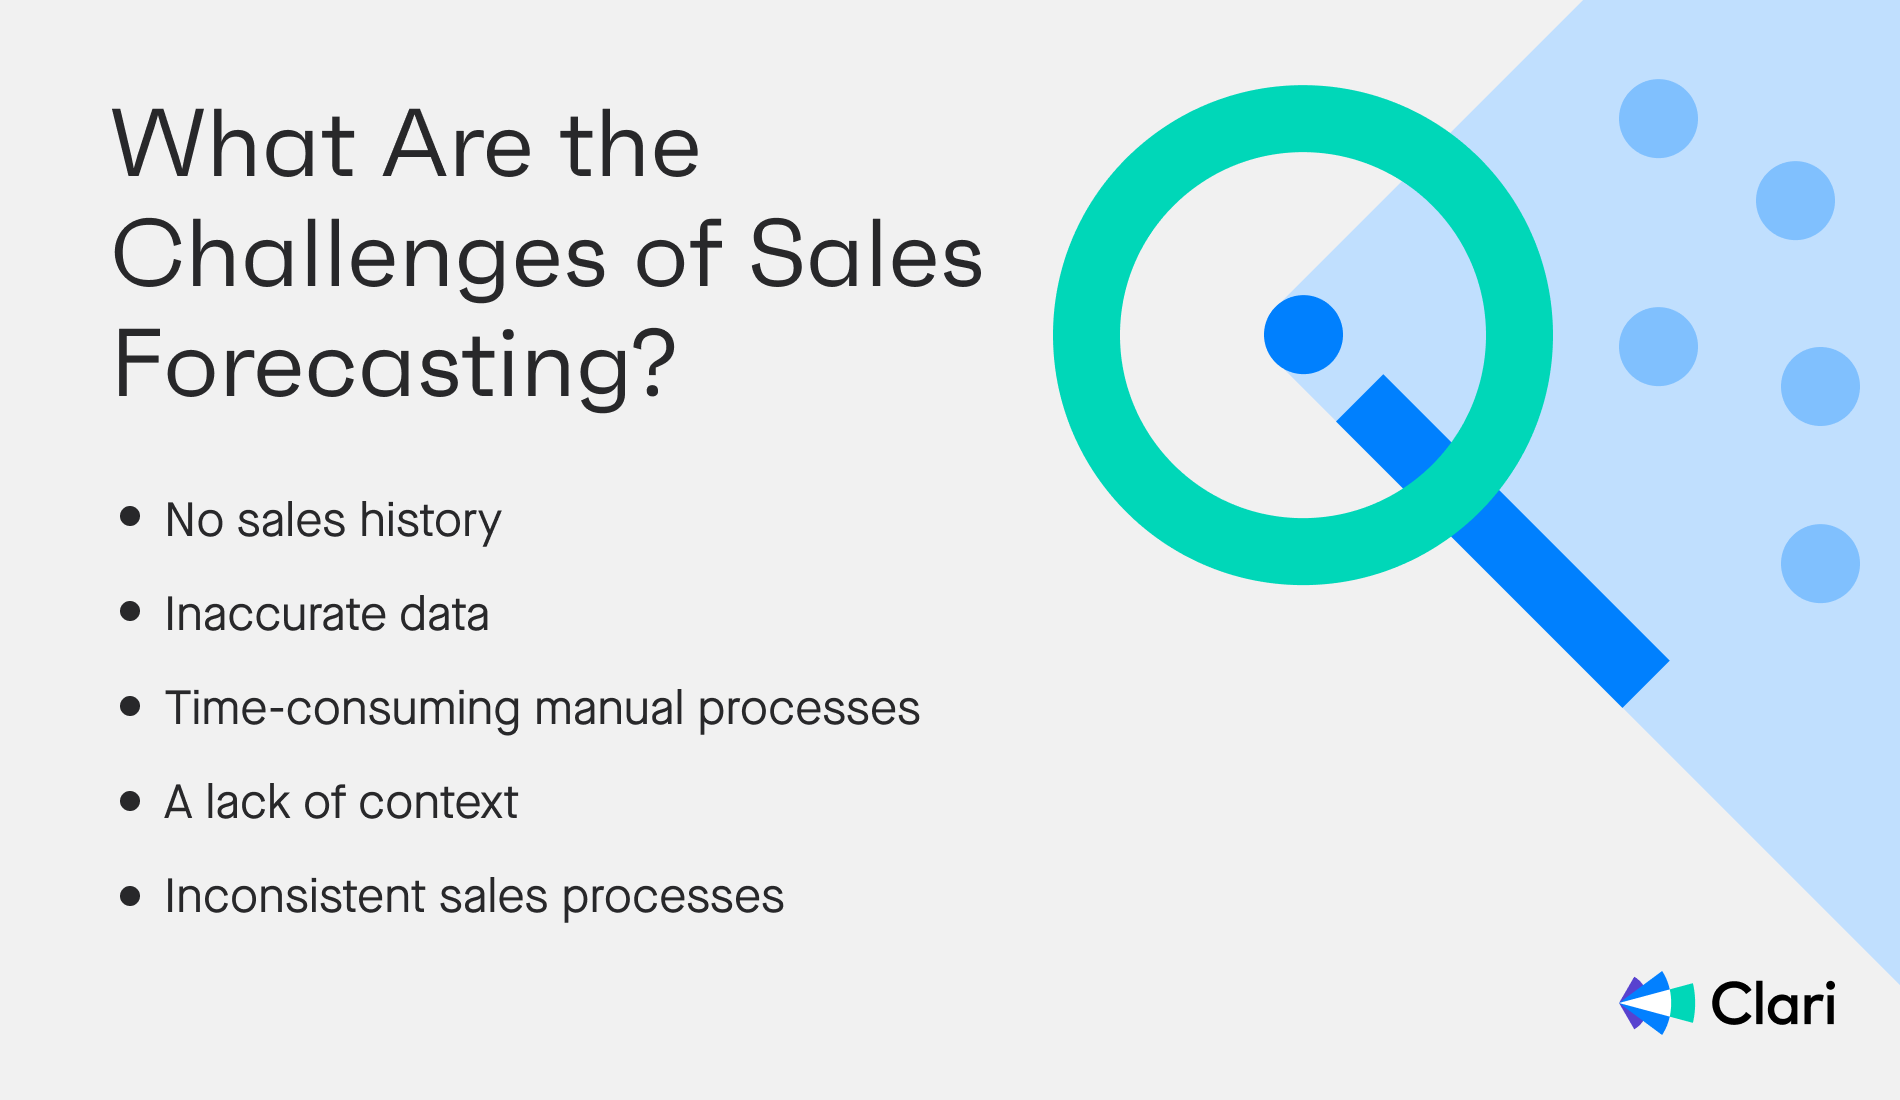 What are the top challenges with sales forecasting